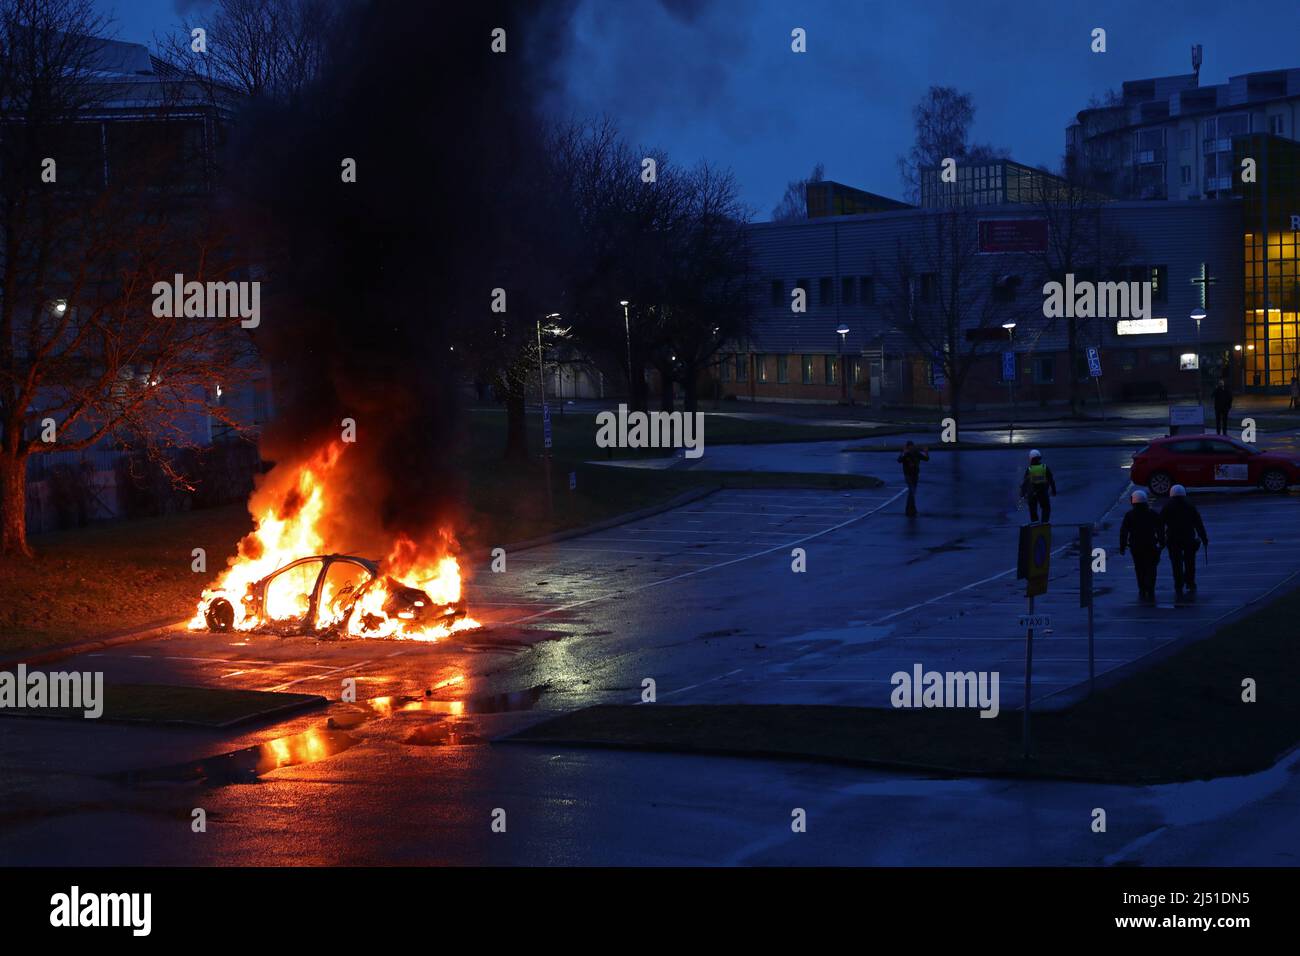 Three policemen were taken to hospital and two people have been arrested in connection with a violent riot in the Linköping district Skäggetorp, where the right-wing extremist Stram kurs (In english: Hard Line) had planned a demonstration. There was also a riot in Norrköping during the There was also a riot in Norrköping during the evening, with several car fires and stone-throwing. In the picture: Ringdansen in Navestad area during Thursday evening. Stock Photo